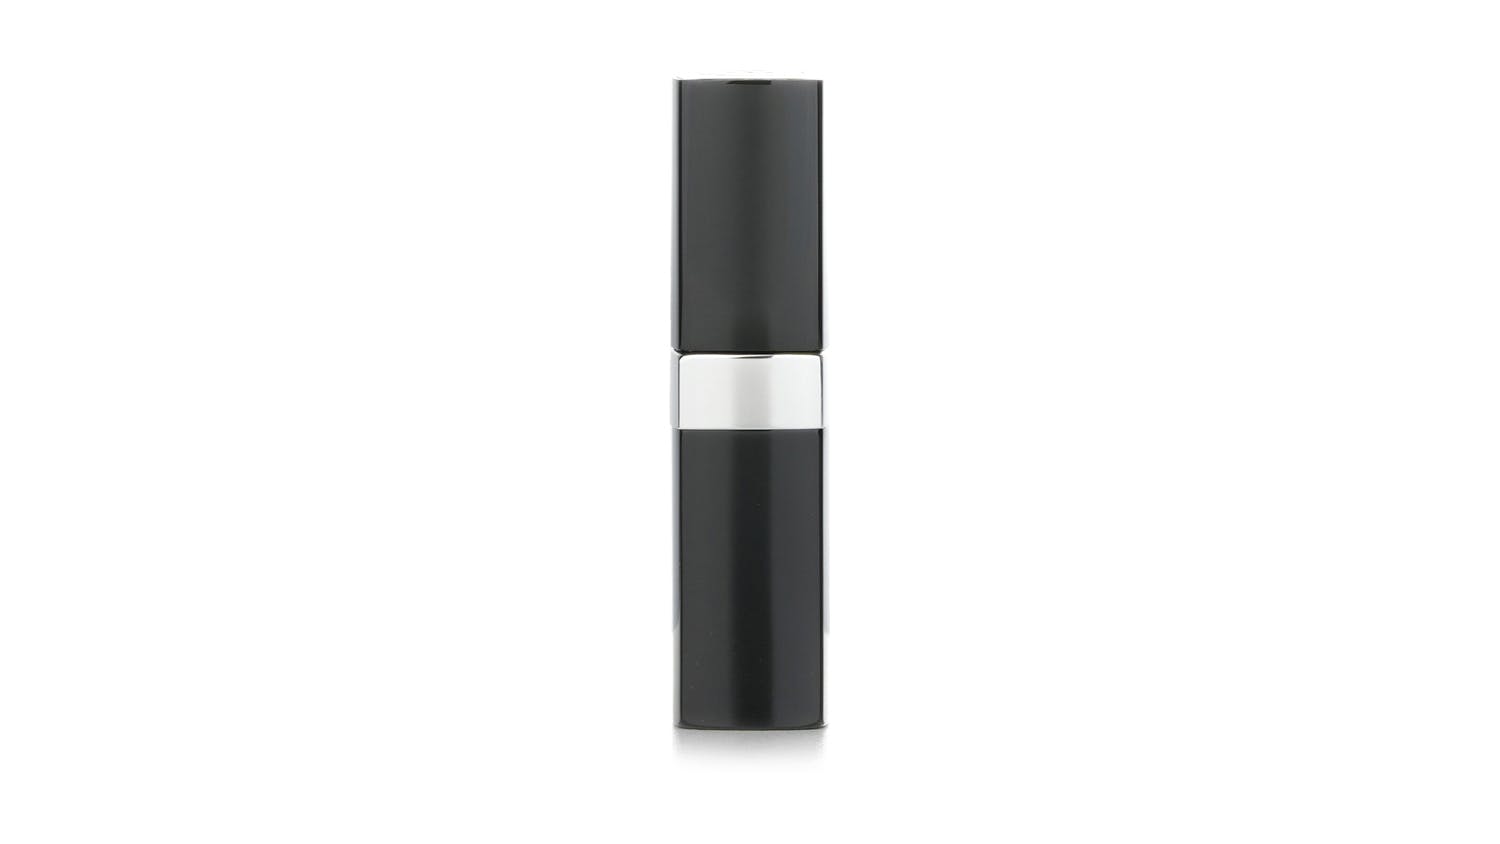 CHANEL, Makeup, Chanel Rouge Coco Bloom Hydrating Plumping Intense Shine  Lip Colour 16 Dream